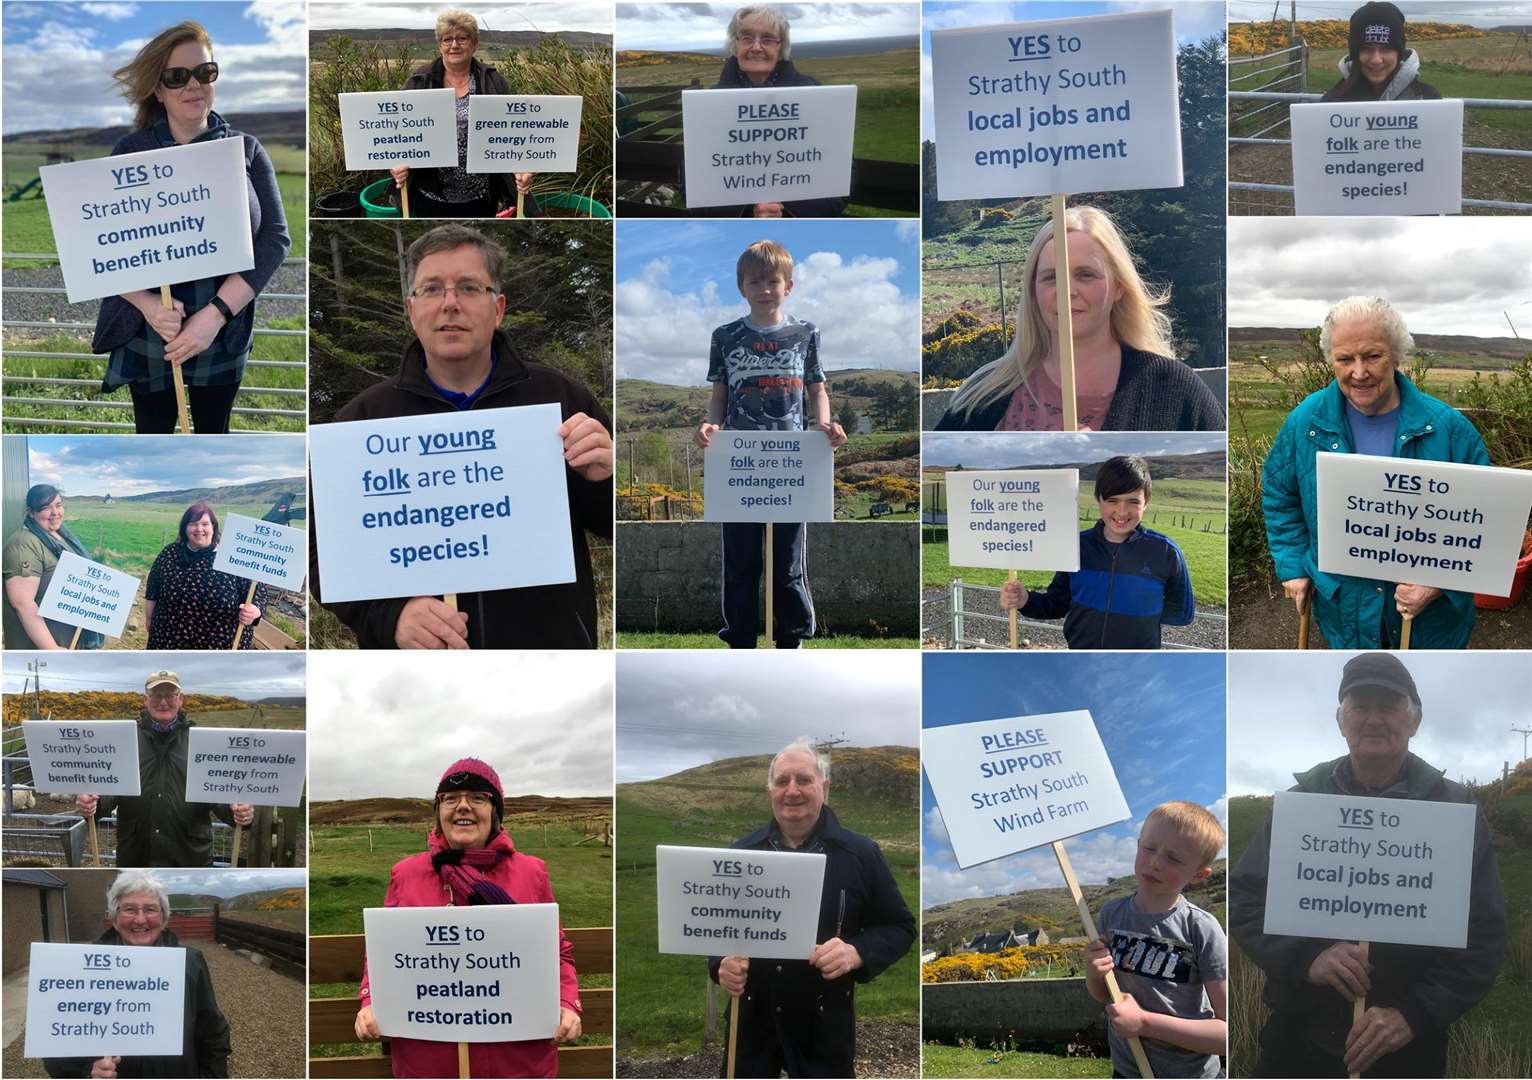 Last week, locals showed their support for the Strathy South Wind Farm by holding up signs saying the wind farm would create local jobs, help with peatland restoration and provide community benefit funds.